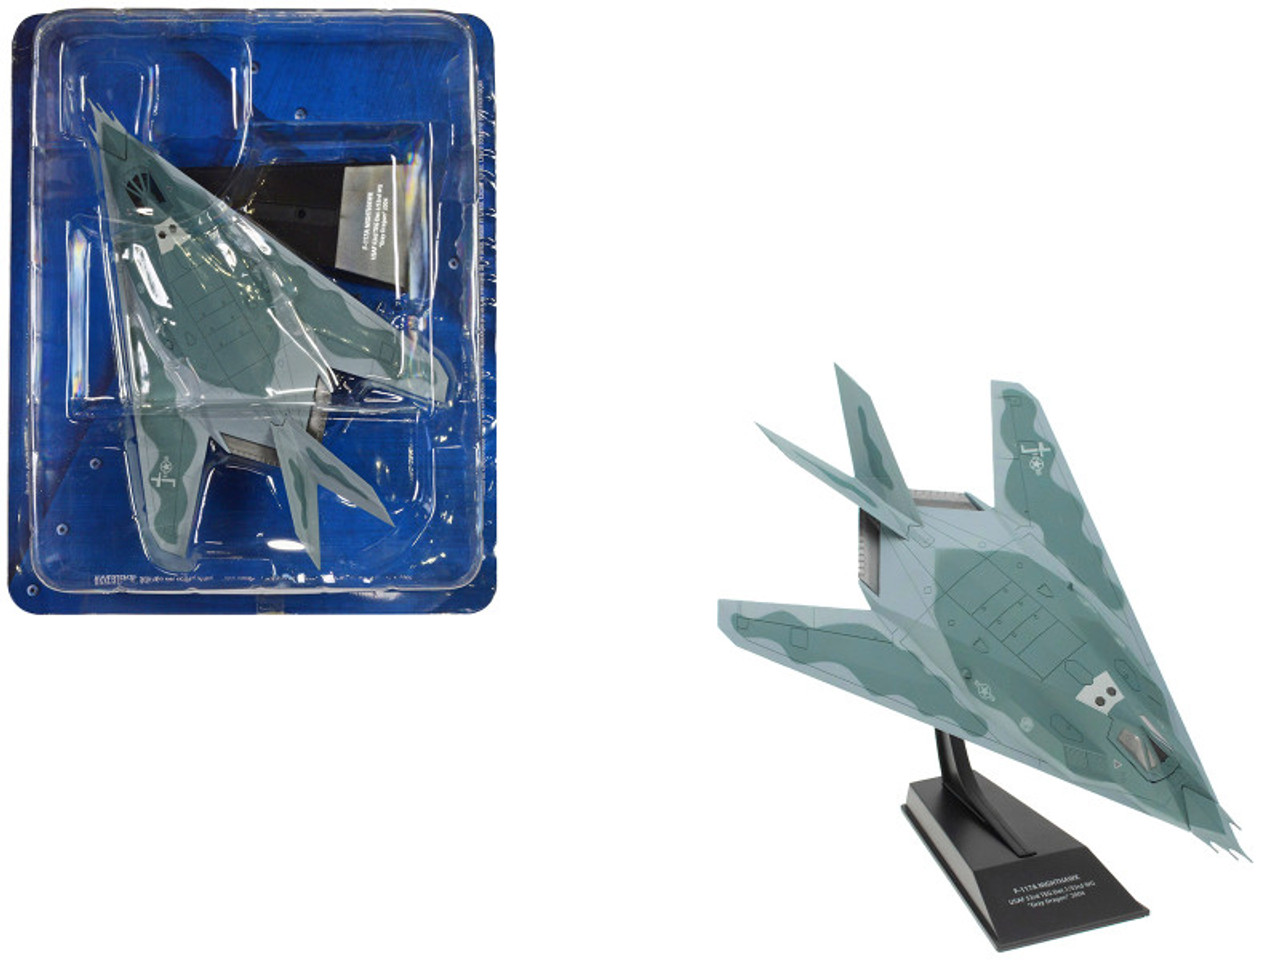 Lockheed F-117A Nighthawk Stealth Aircraft "53rd Test and Evaluation Group Detachment 1 53rd Wing Gray Dragon" (2004) United States Air Force 1/100 Diecast Model by Hachette Collections